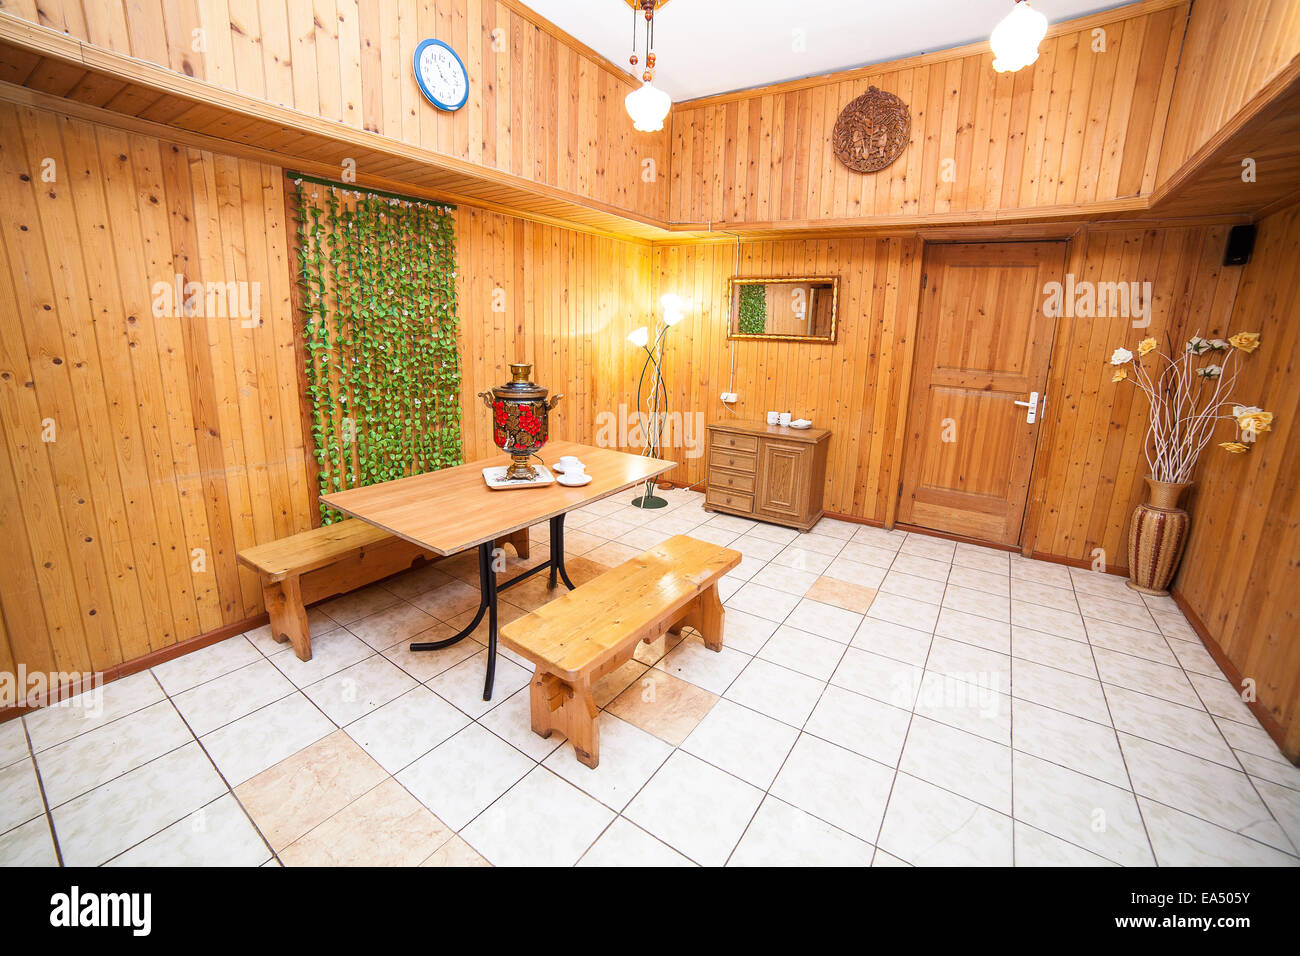 Room on wooden house interior Stock Photo